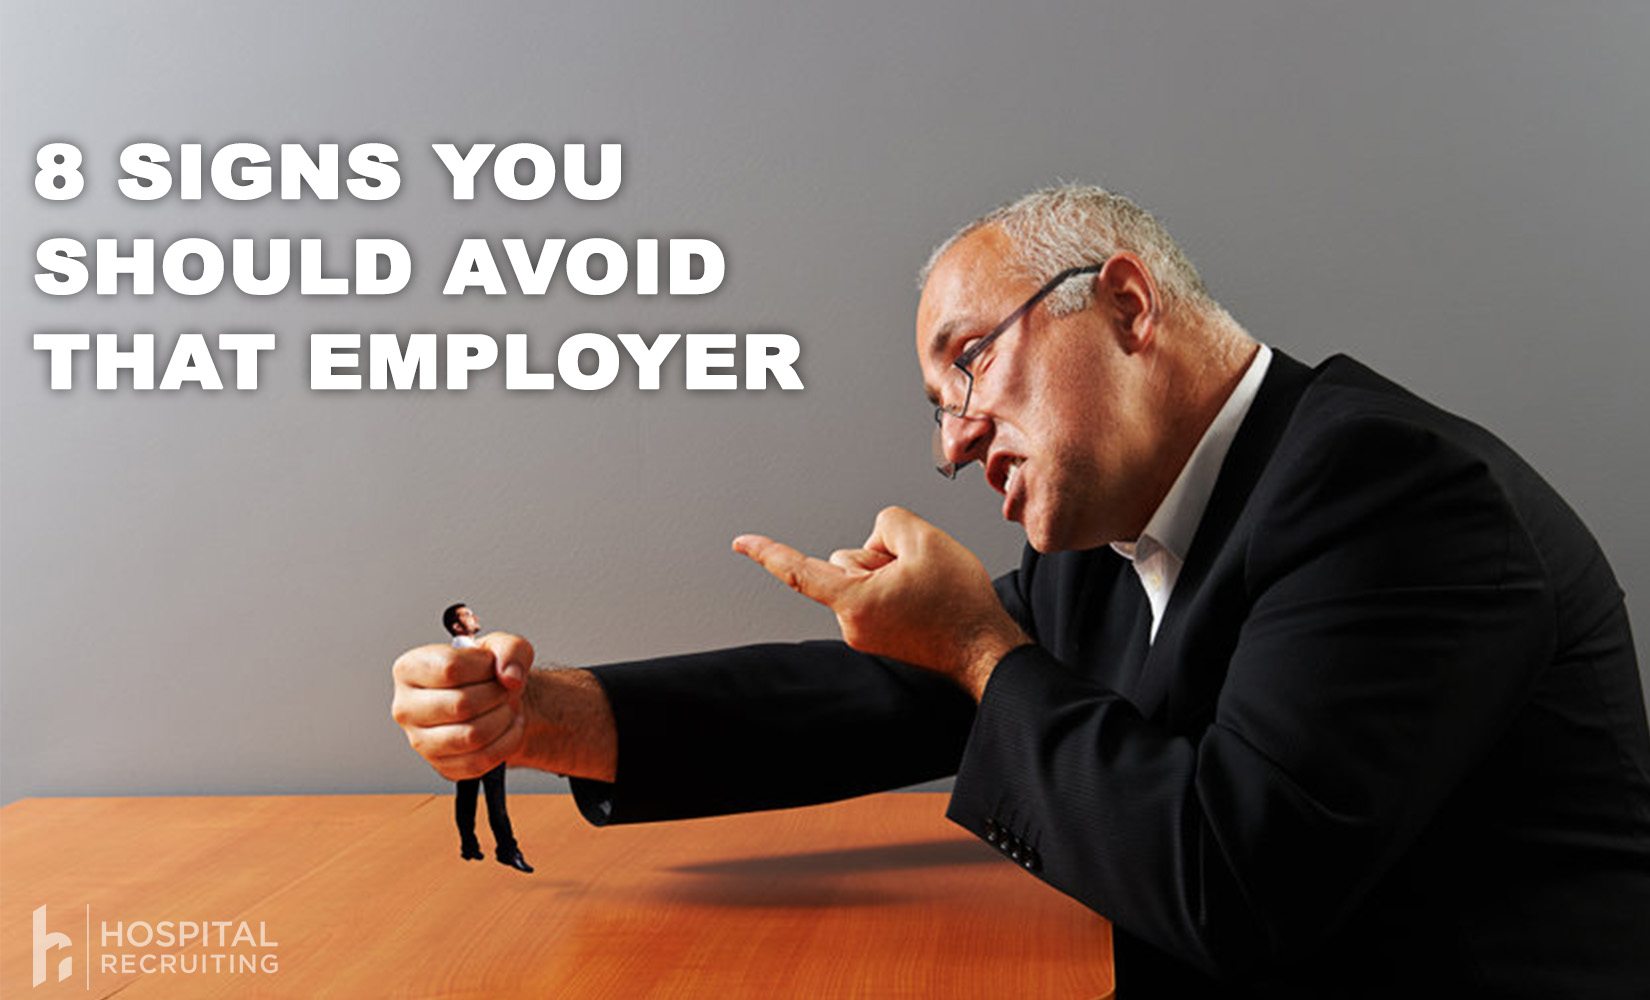 8 signs you should avoid an employer